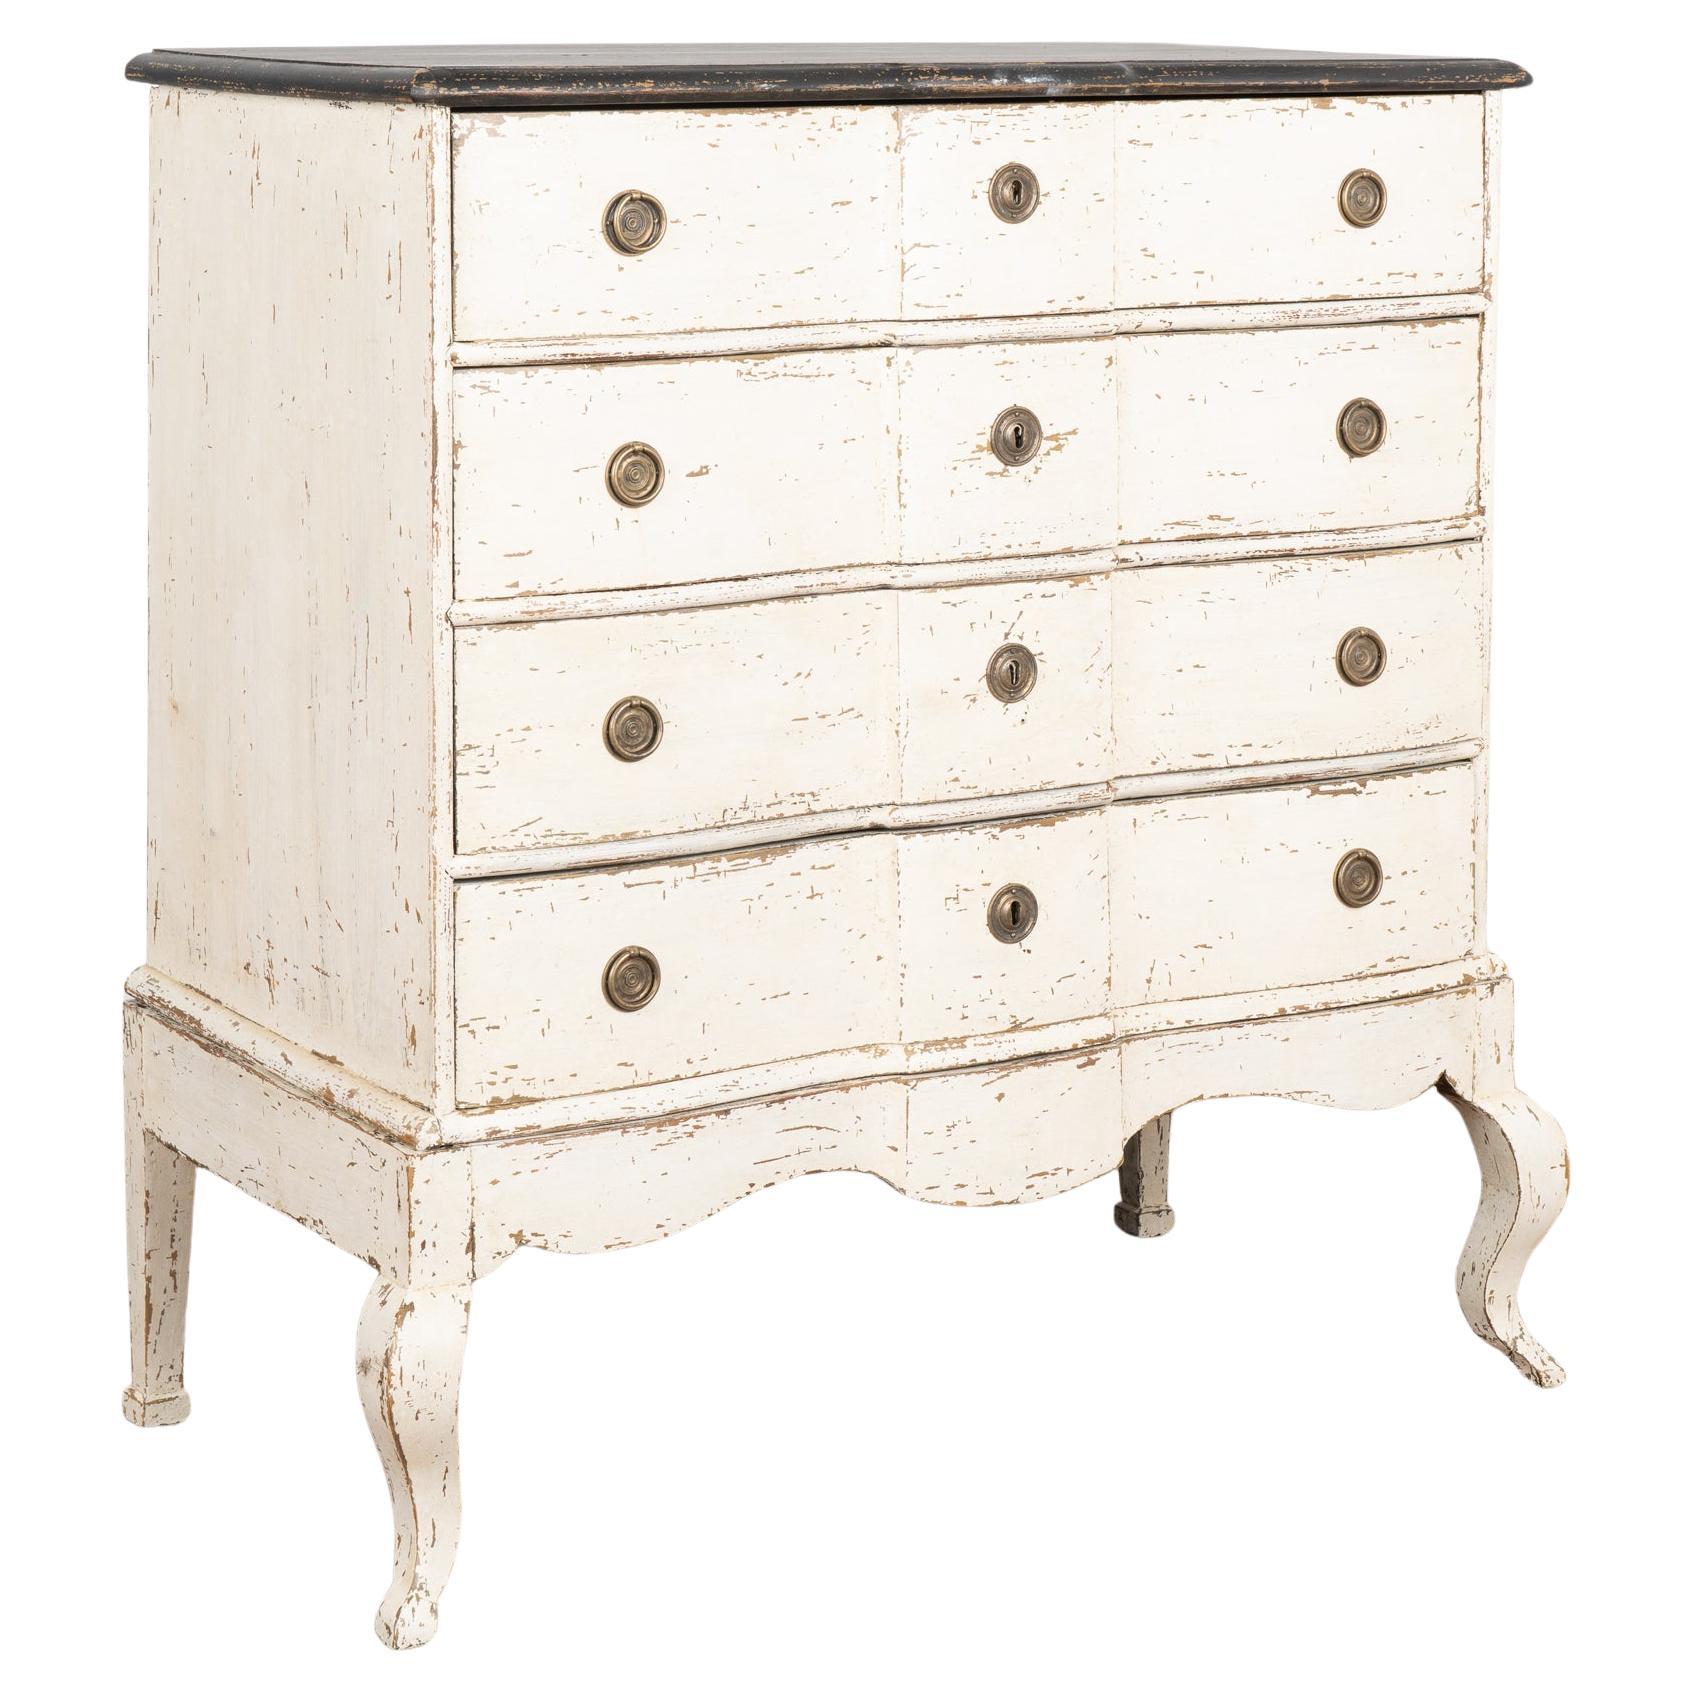 Rococo White Painted Chest of Drawers, Denmark circa 1770